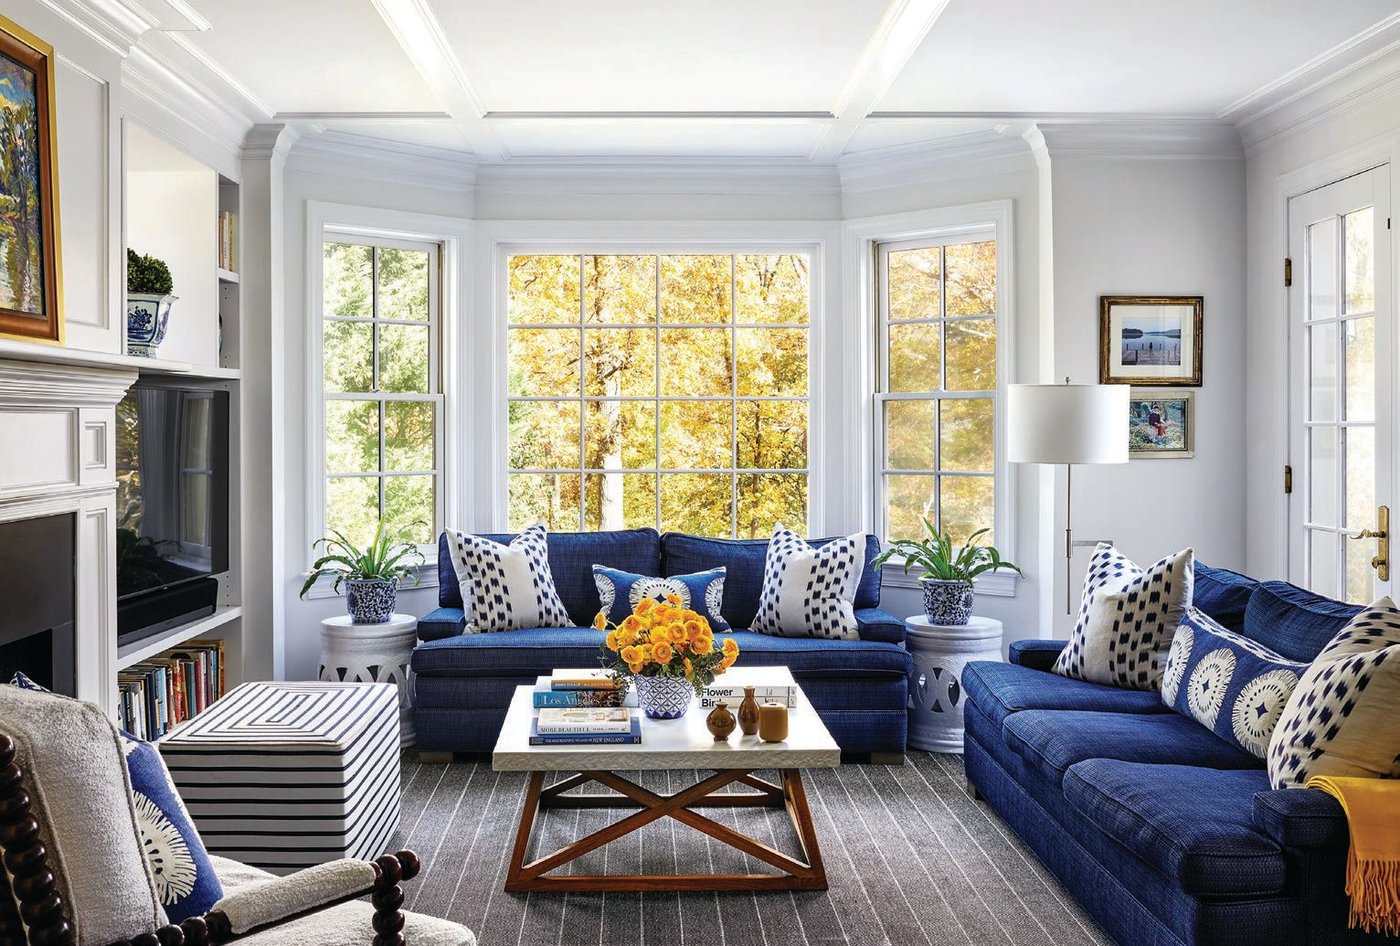 Designer Liz Levin created sunny, fresh spaces. PHOTOGRAPHED BY STACY ZARIN GOLDBERG